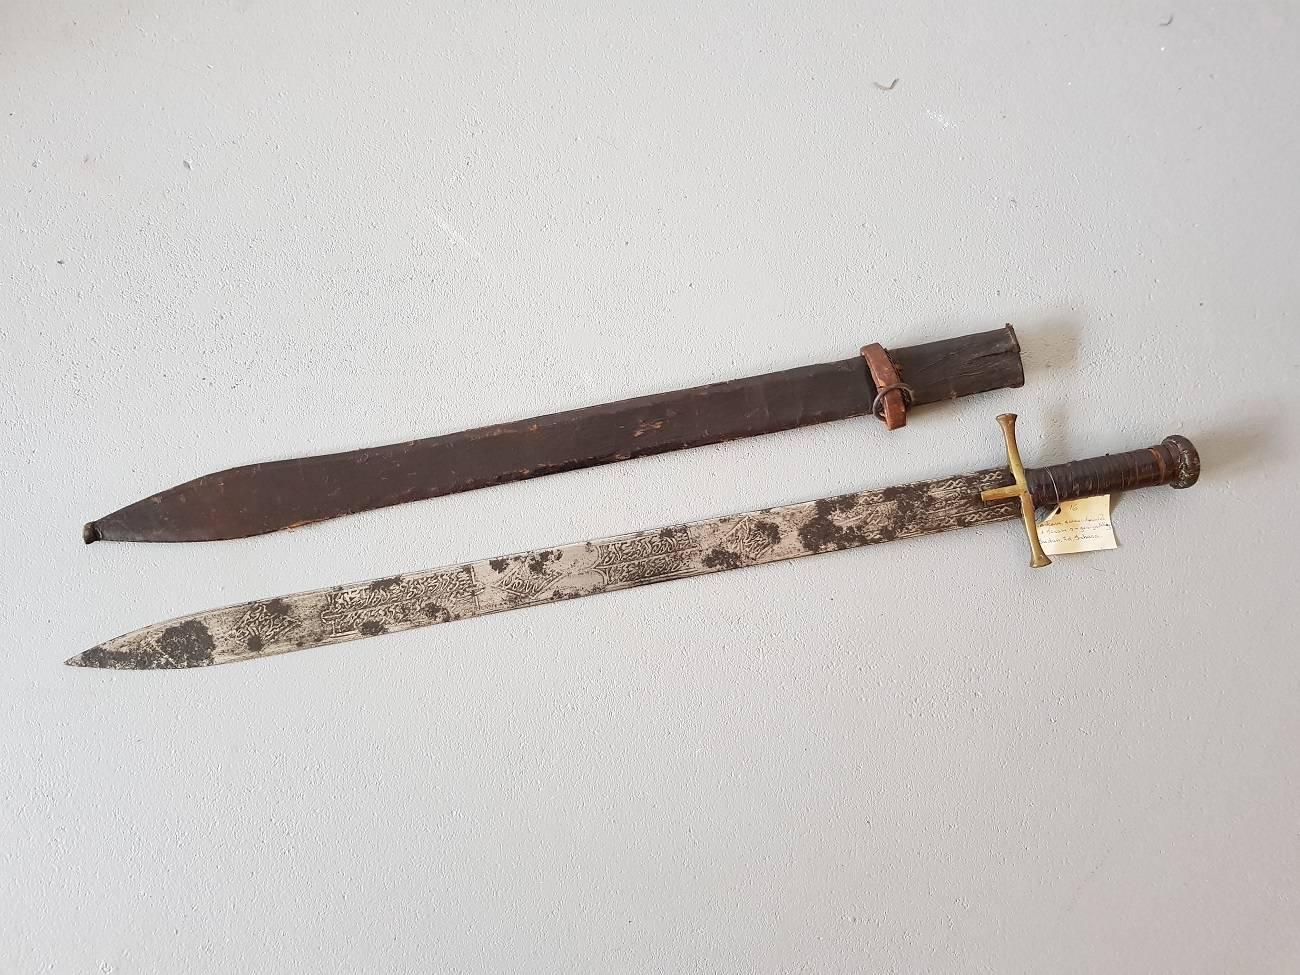 Mid-19th century Kaskara model sword and scabbard of the Hausa tribe Sudan Southern Sahara. It has an etched blade with probably texts from the Koran.

The measurements are,
Depth 4 cm/ 1.5 inch.
Width 11 cm/ 4.3 inch.
Height 78 cm/ 30.7